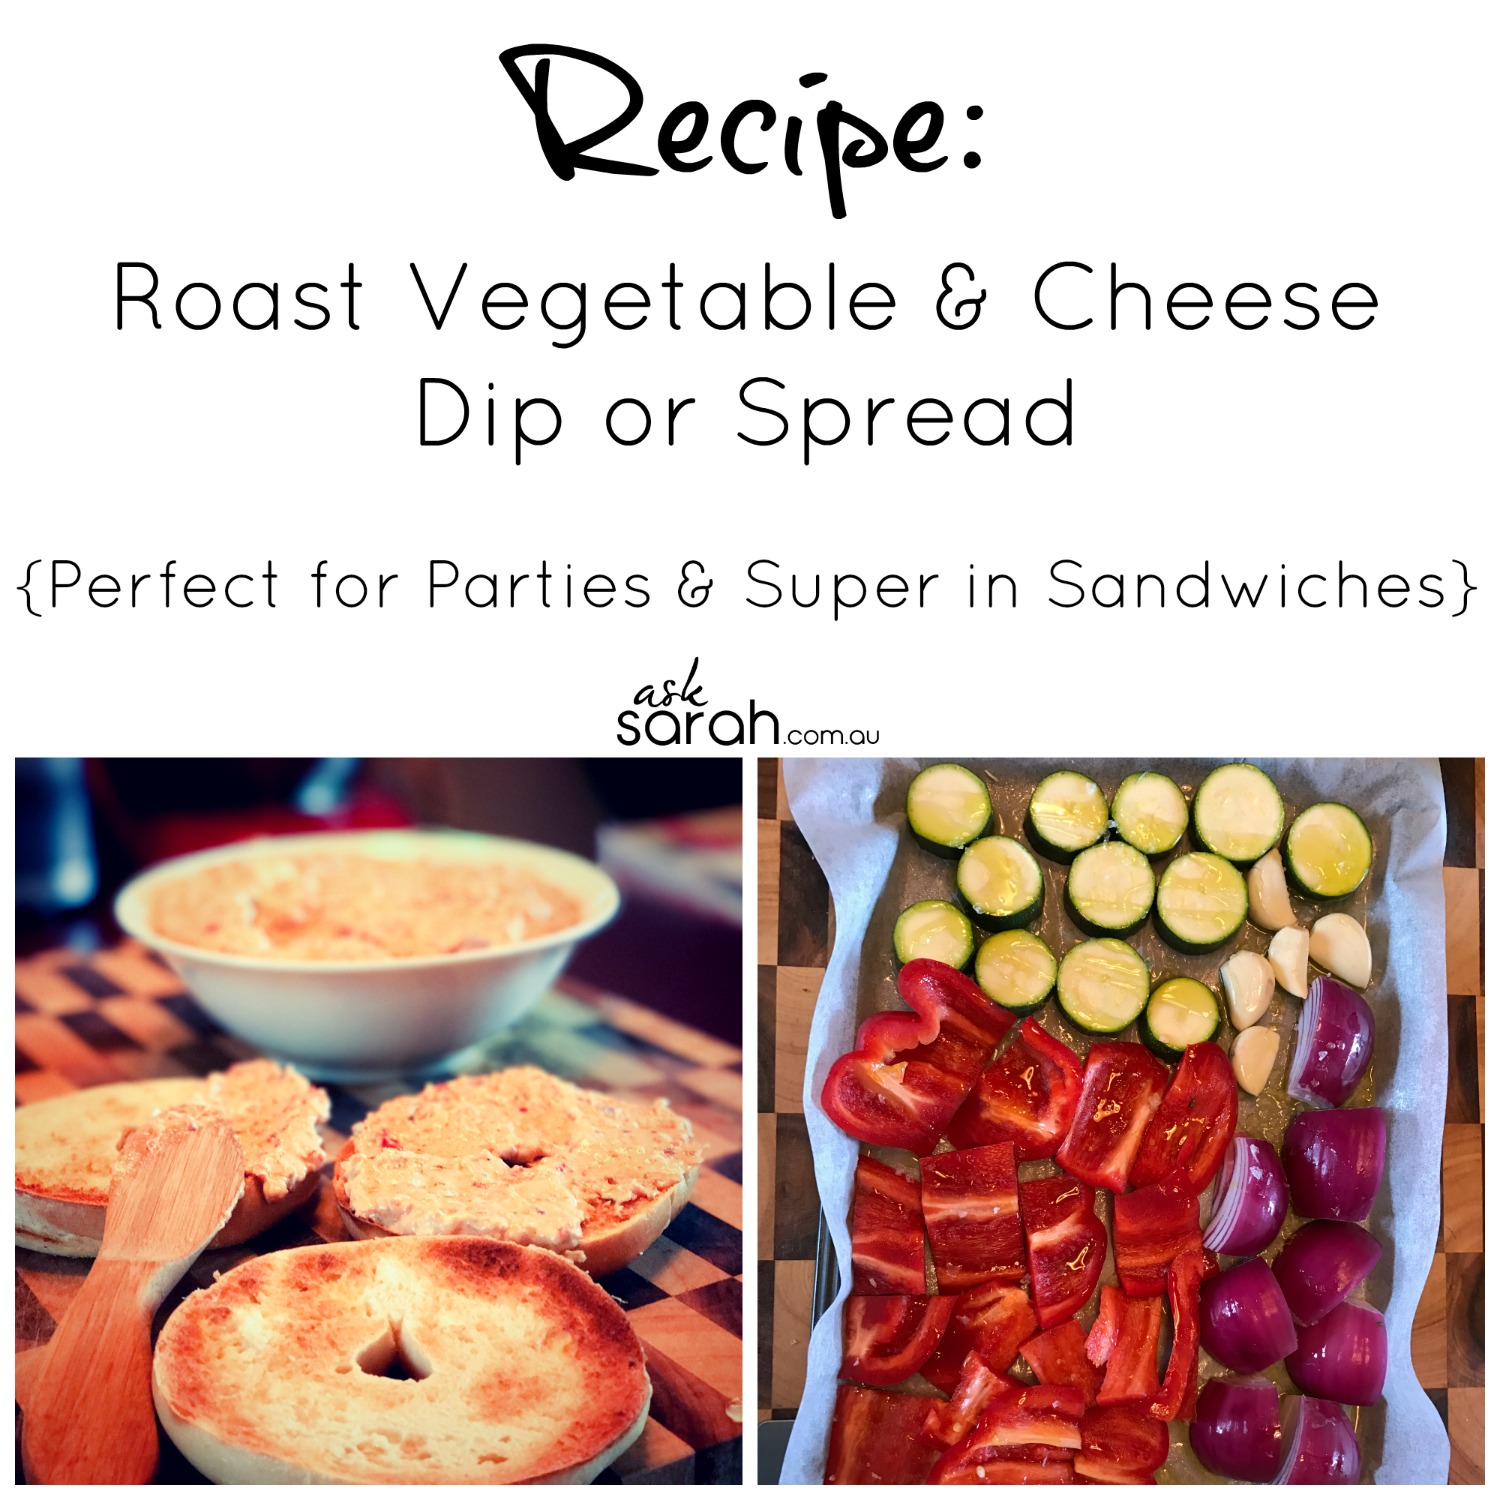 Recipe: Roast Vegetable & Cheese Dip or Spread {Perfect for Parties & Super in Sandwiches}